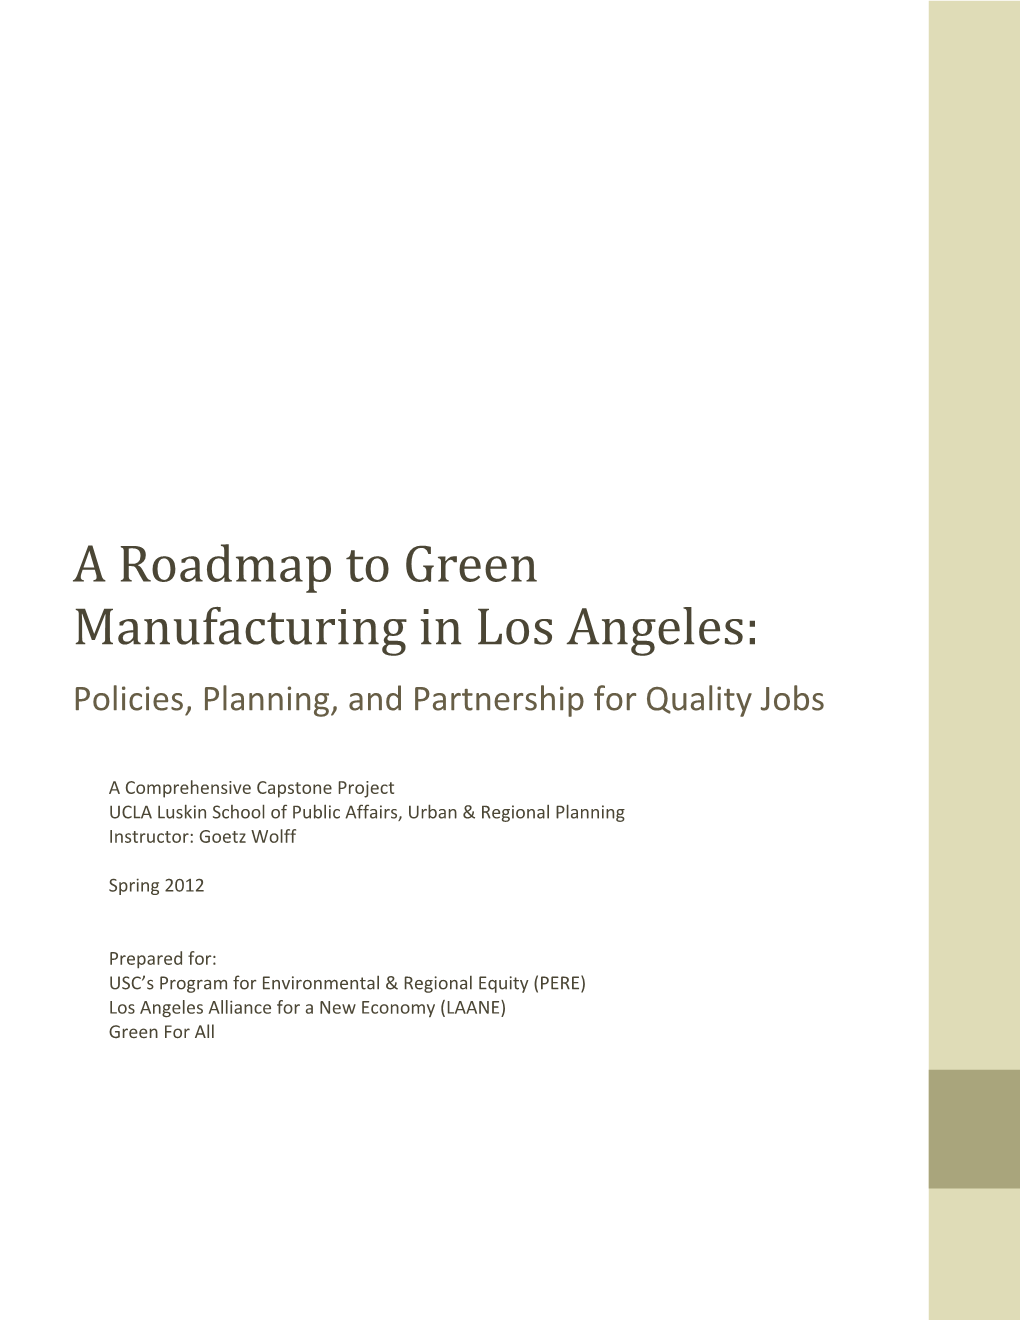 A Roadmap to Green Manufacturing in Los Angeles